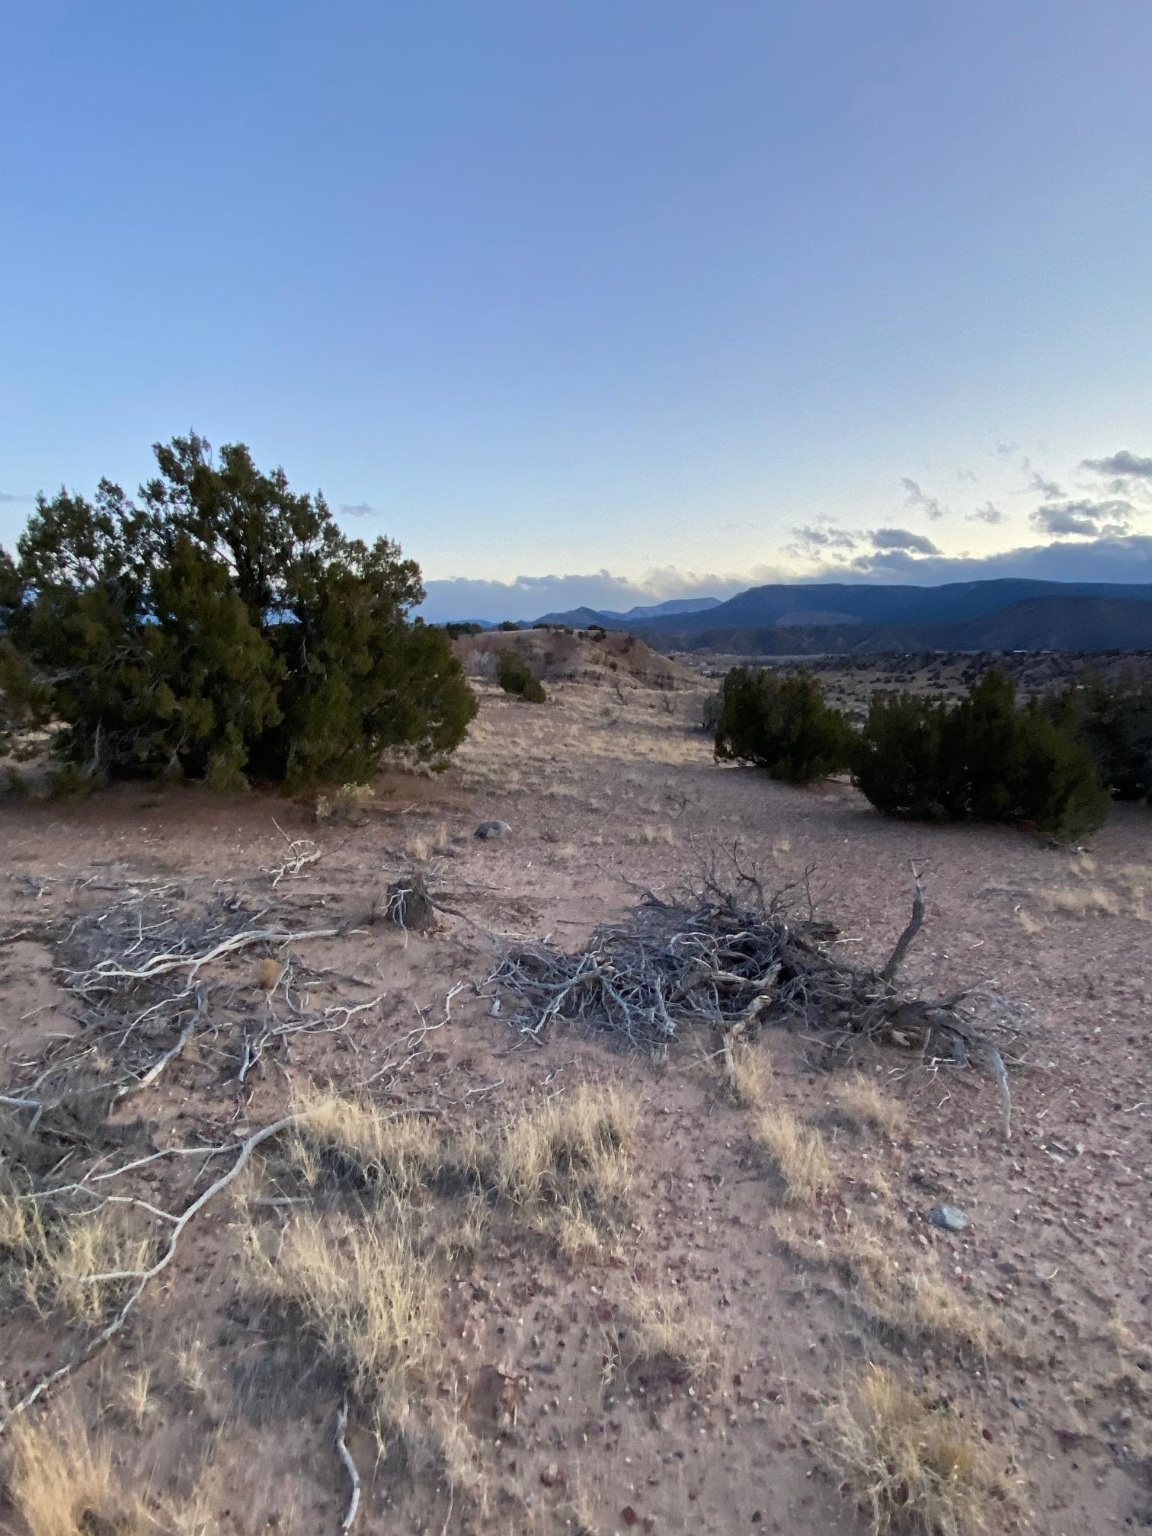 TBD COUNTY ROAD 156, Abiquiu, New Mexico 87510, ,Land,For Sale,TBD COUNTY ROAD 156,202105449